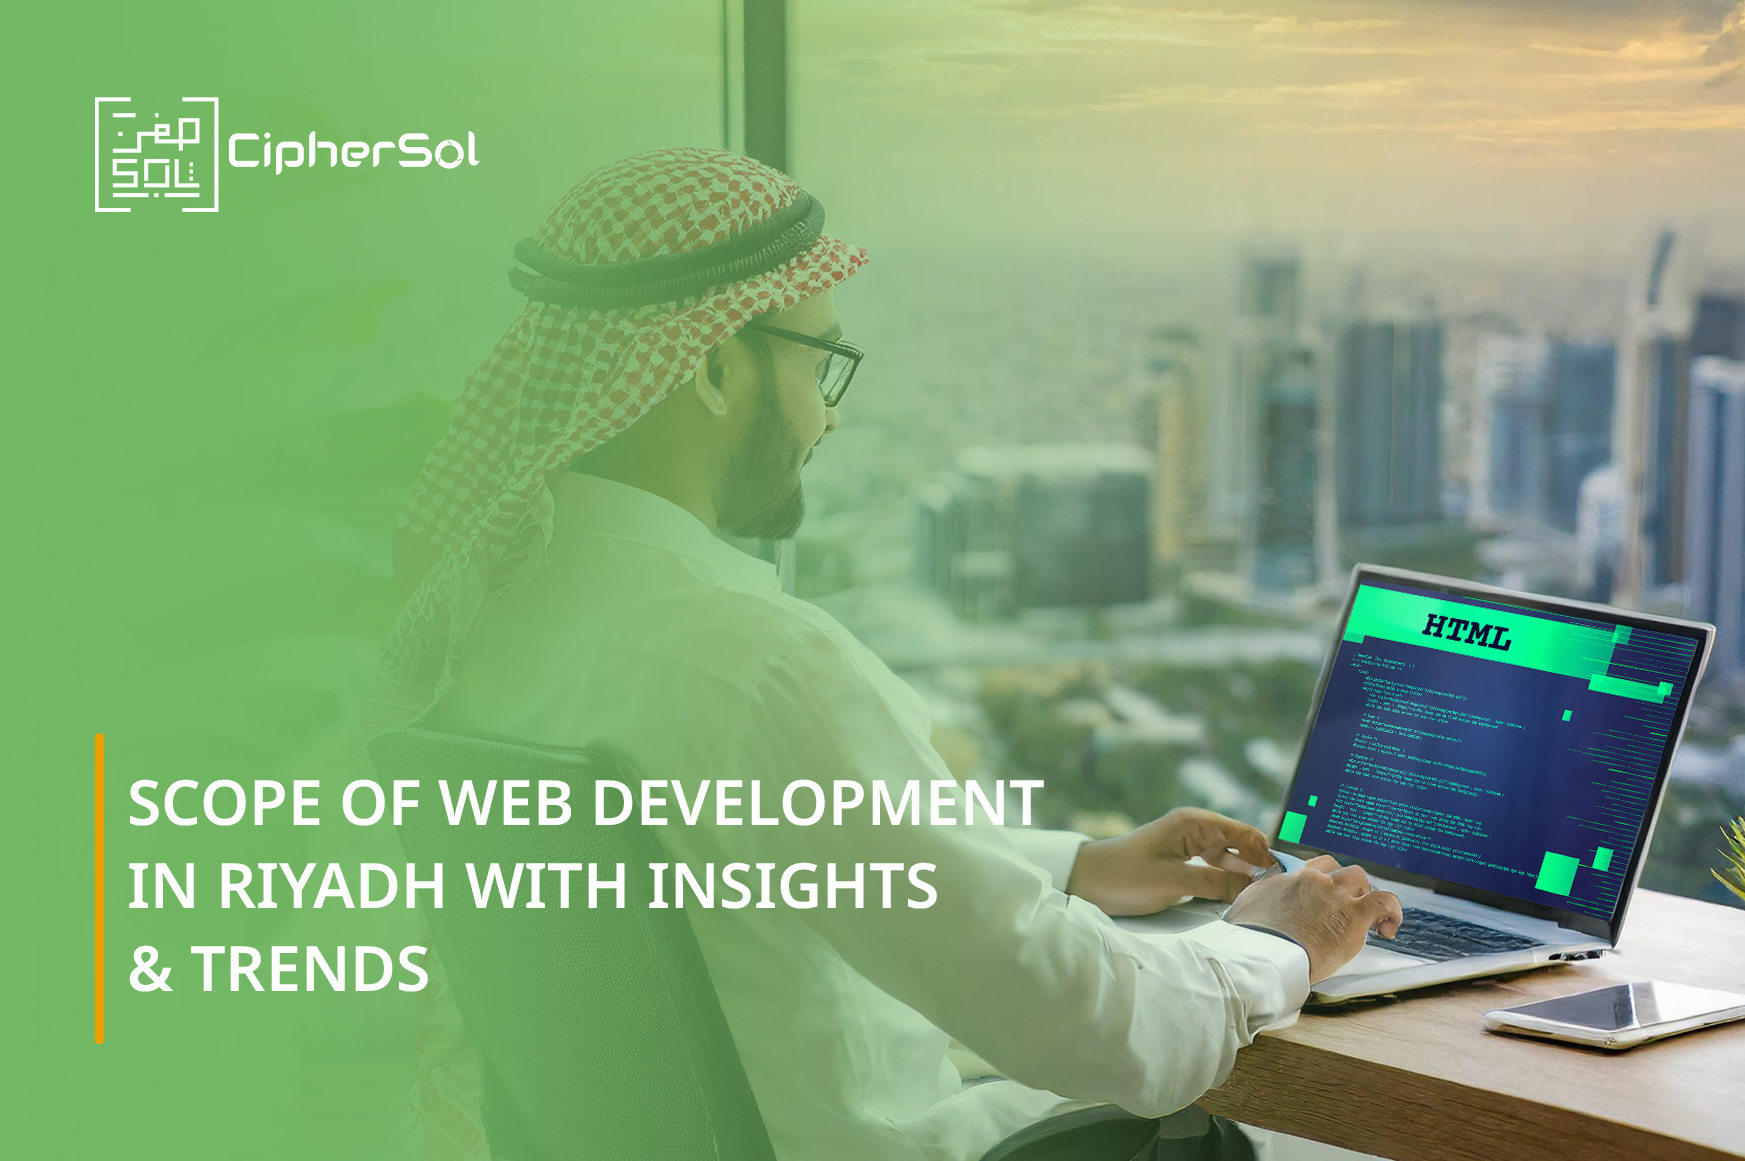 Scope of Web Development in Riyadh with Insights & Trends